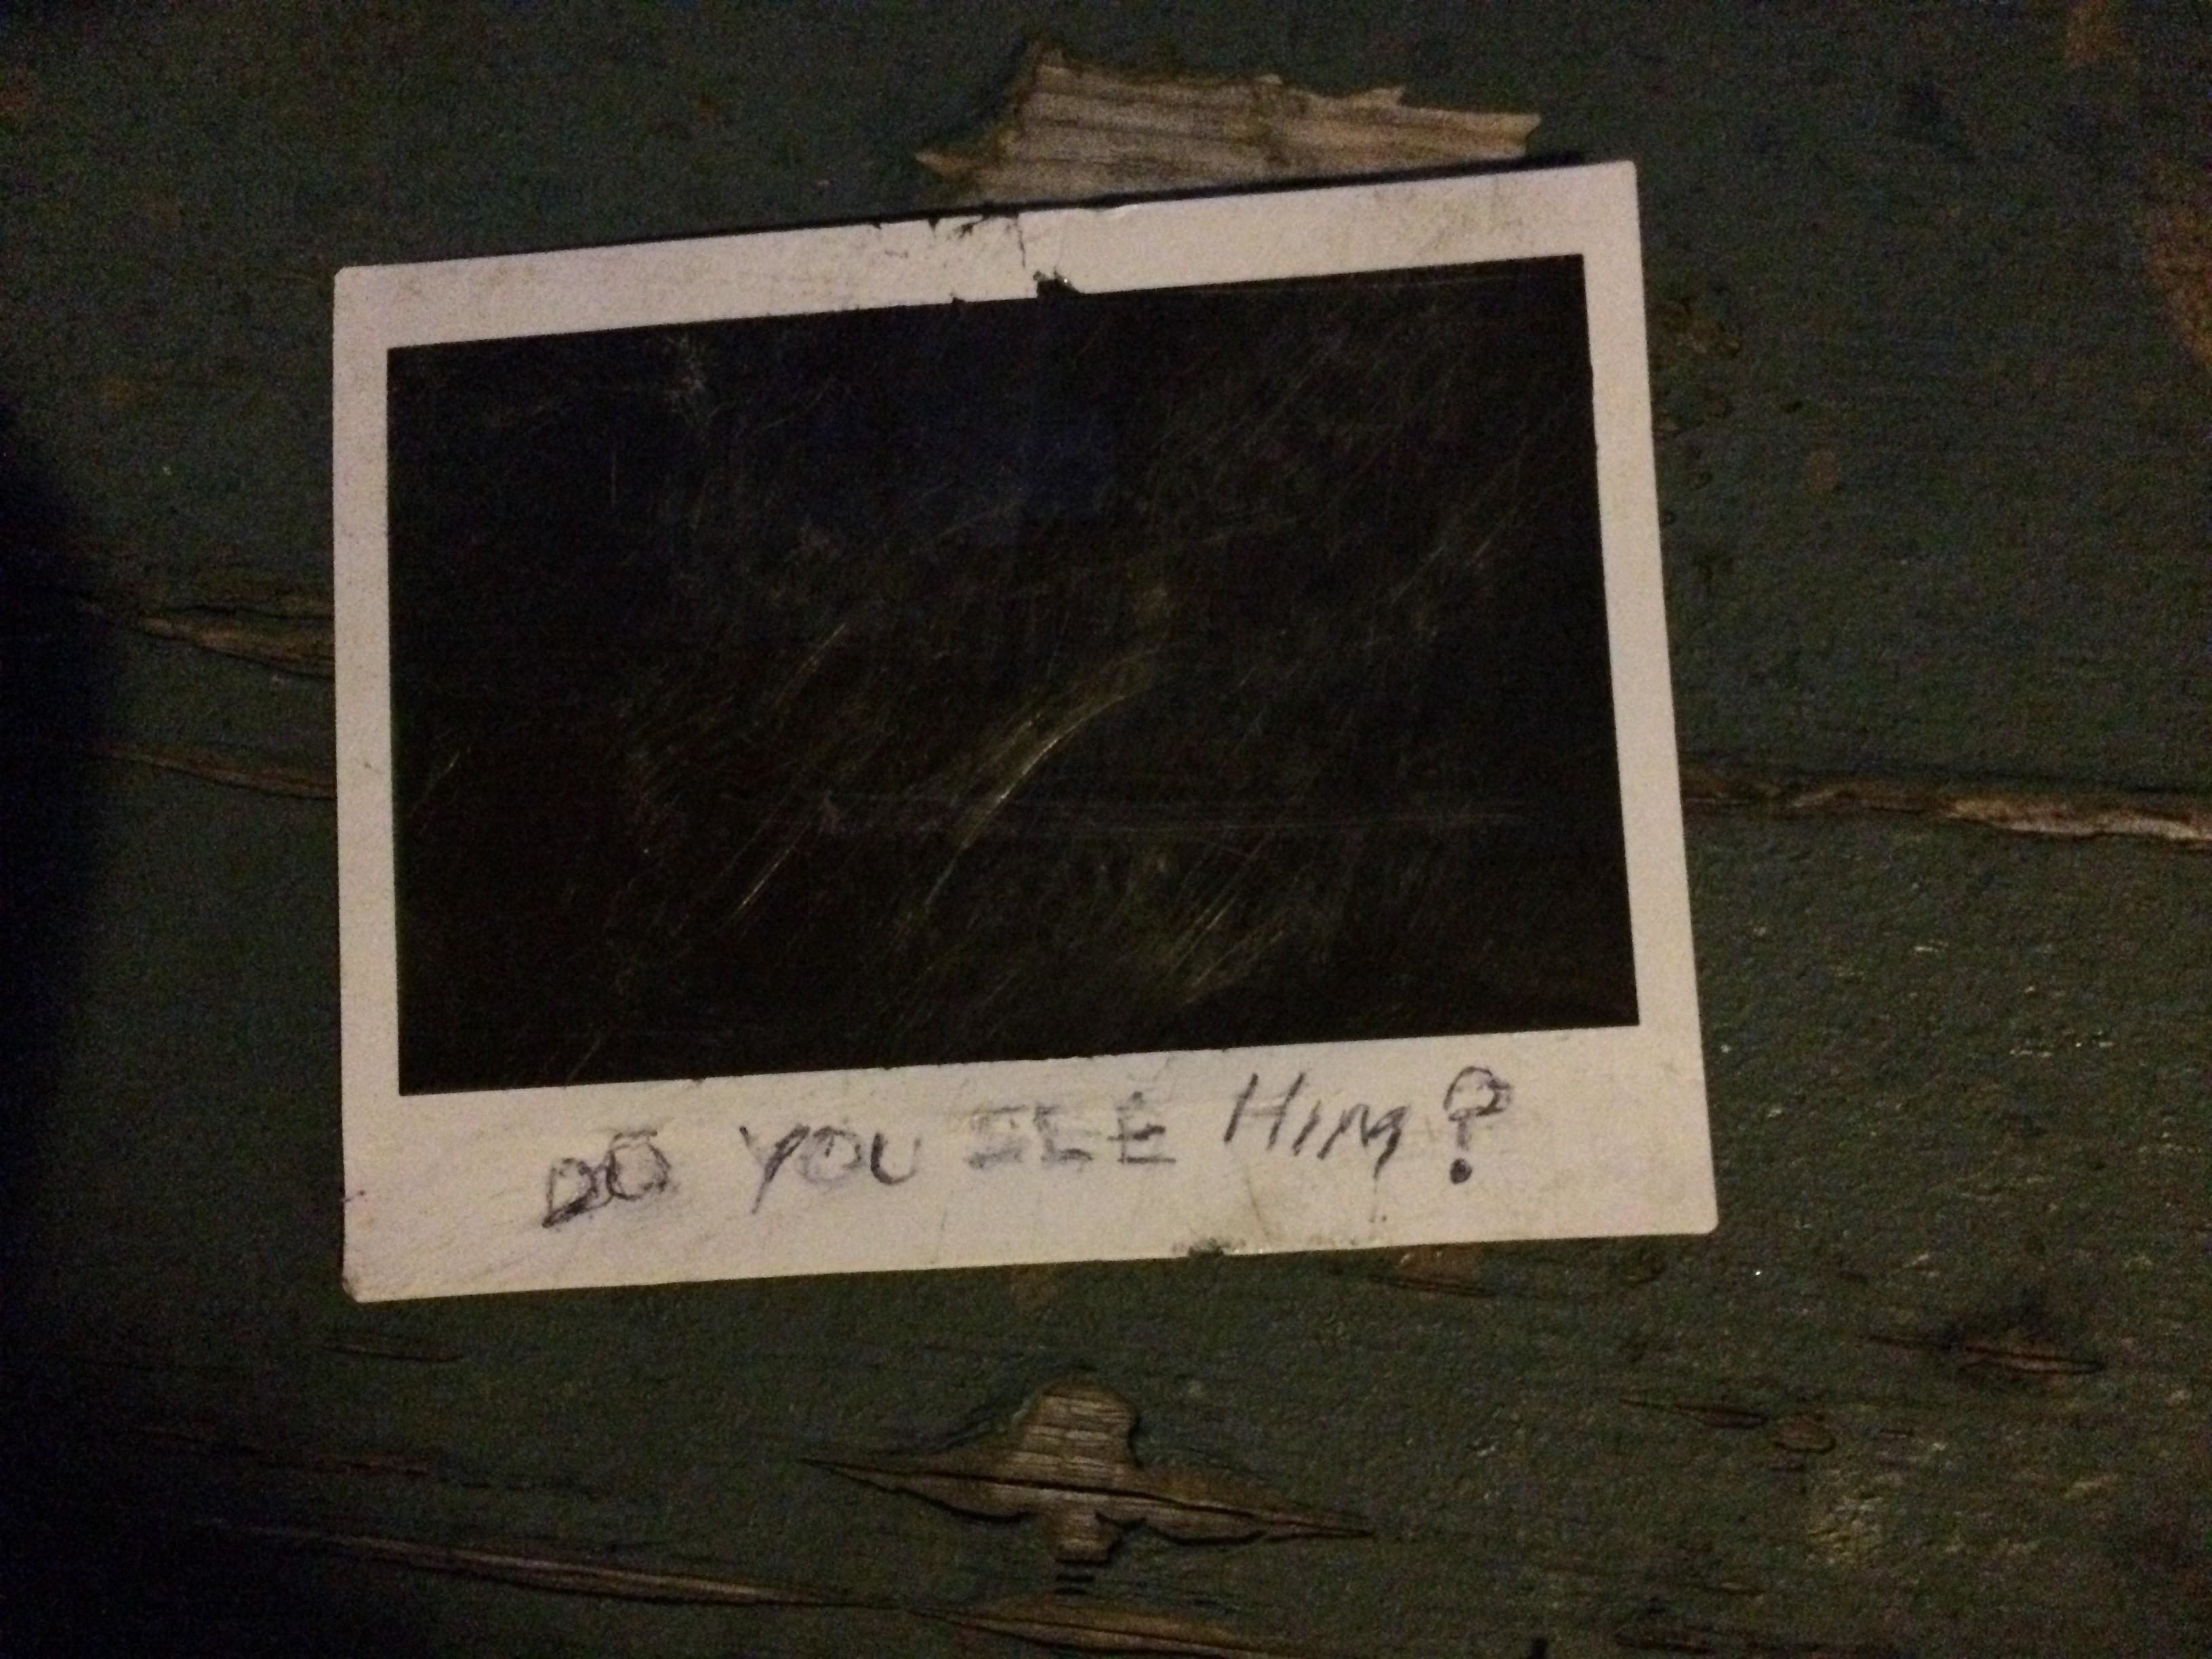 An imperceptible Polaroid with words written in pen &quot;Do you see him?&quot; on it